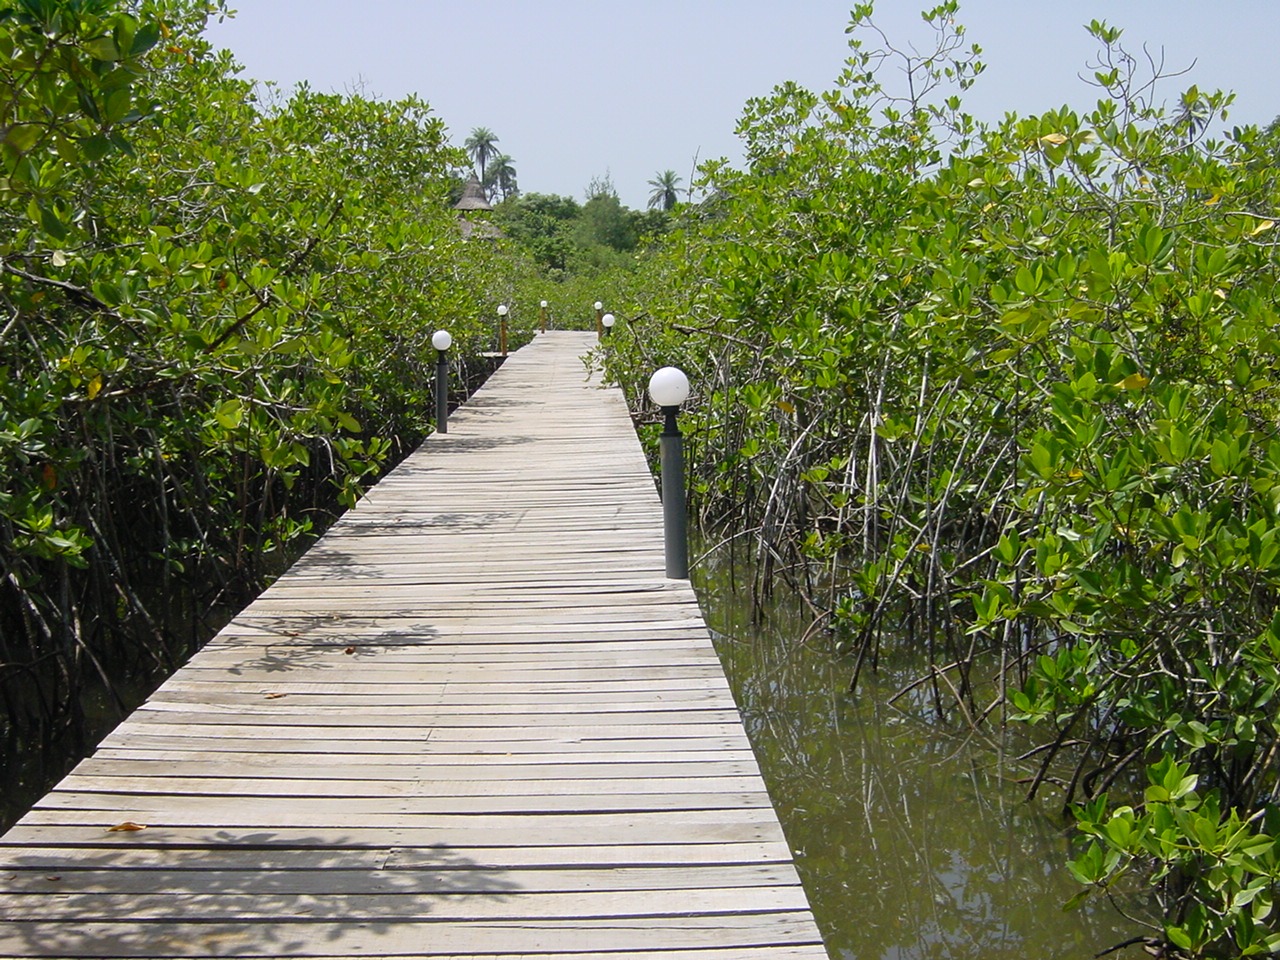 A SUSTAINABLE PATH FOR LARGE-SCALE COASTAL TOURISM IN MEXICO